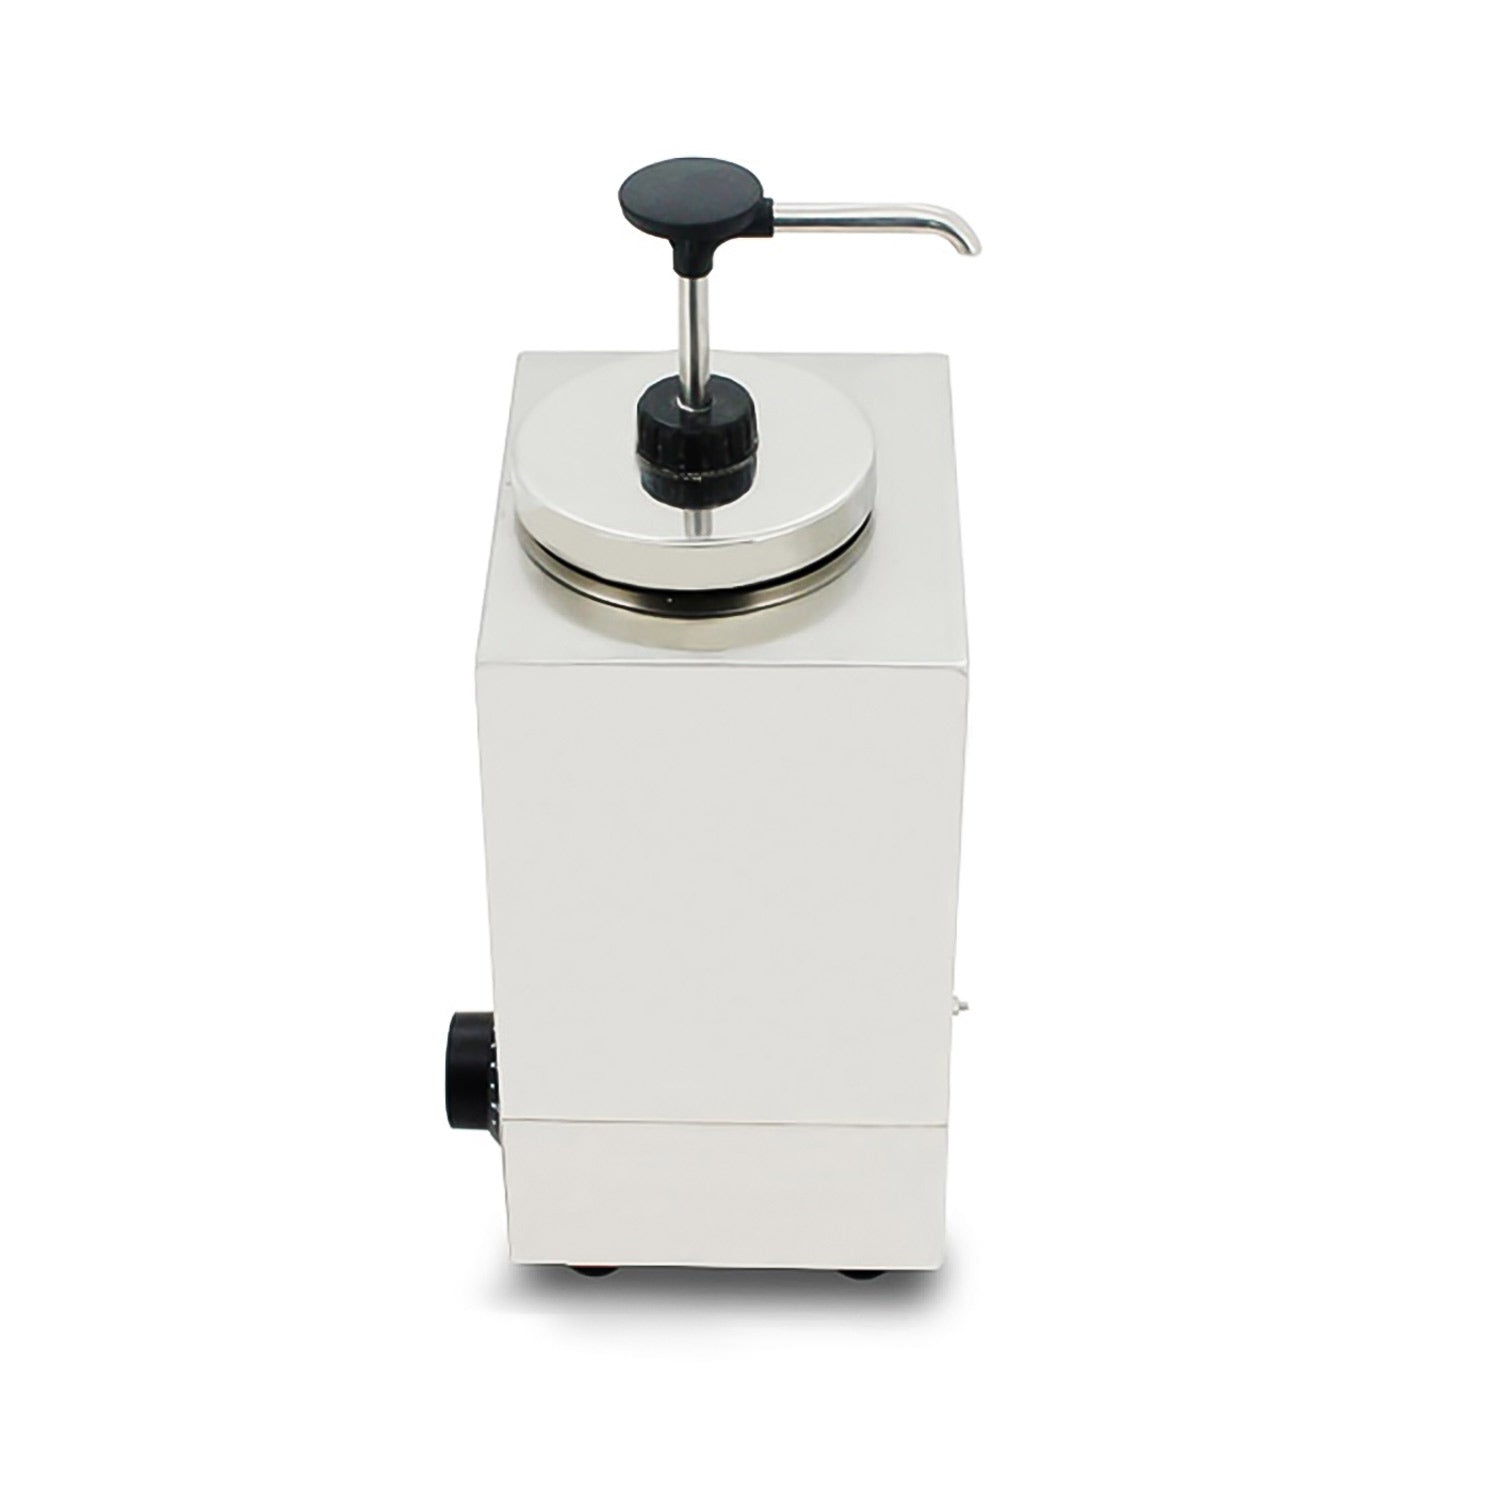 AP-313S Electric Sauce Dispenser | Topping Warmer with Pump | Sauce Dispenser | Commercial and Home Use